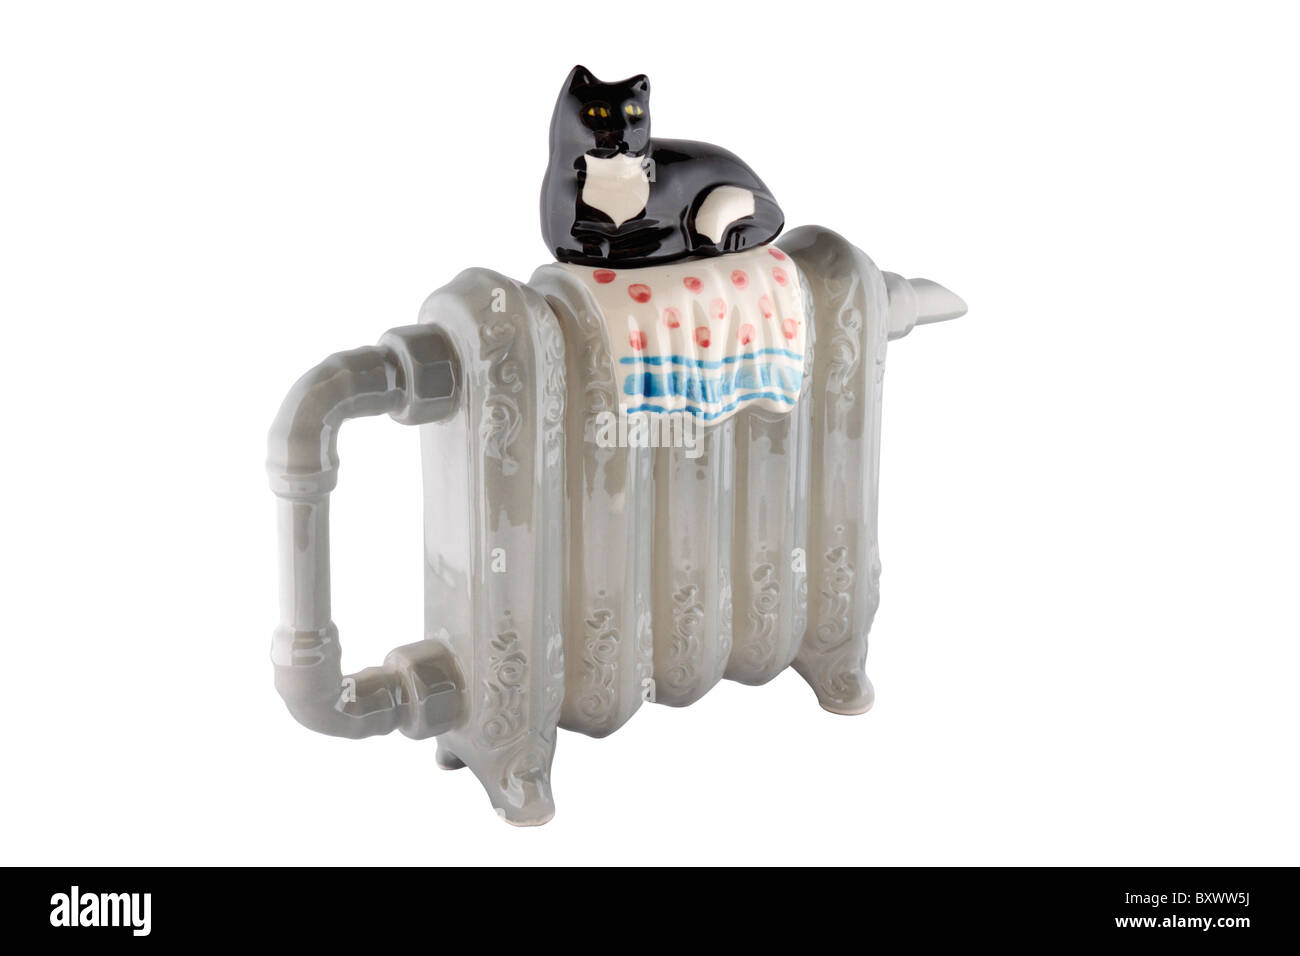 Ornamental novelty teapot in the shape of an old fashioned cast iron radiator with a cat for a lid Stock Photo